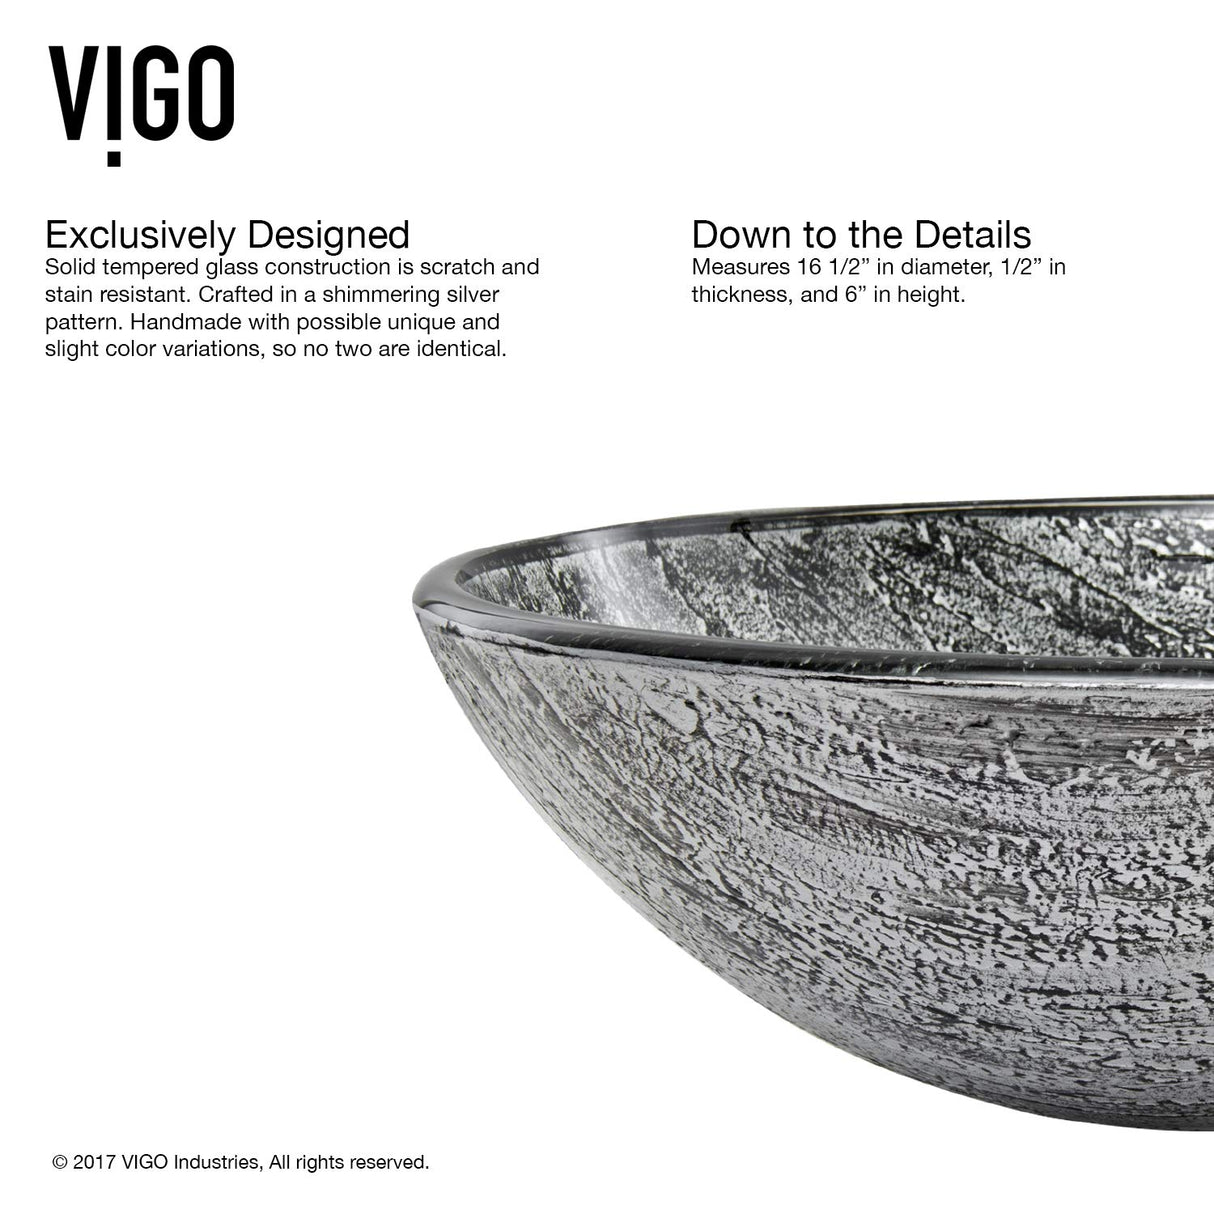 VIGO VGT559 16.5" L -16.5" W -12.38" H Titanium Handmade Glass Round Vessel Bathroom Sink Set in Slate Grey Finish with Brushed Nickel Single-Handle Single Hole Faucet and Pop Up Drain